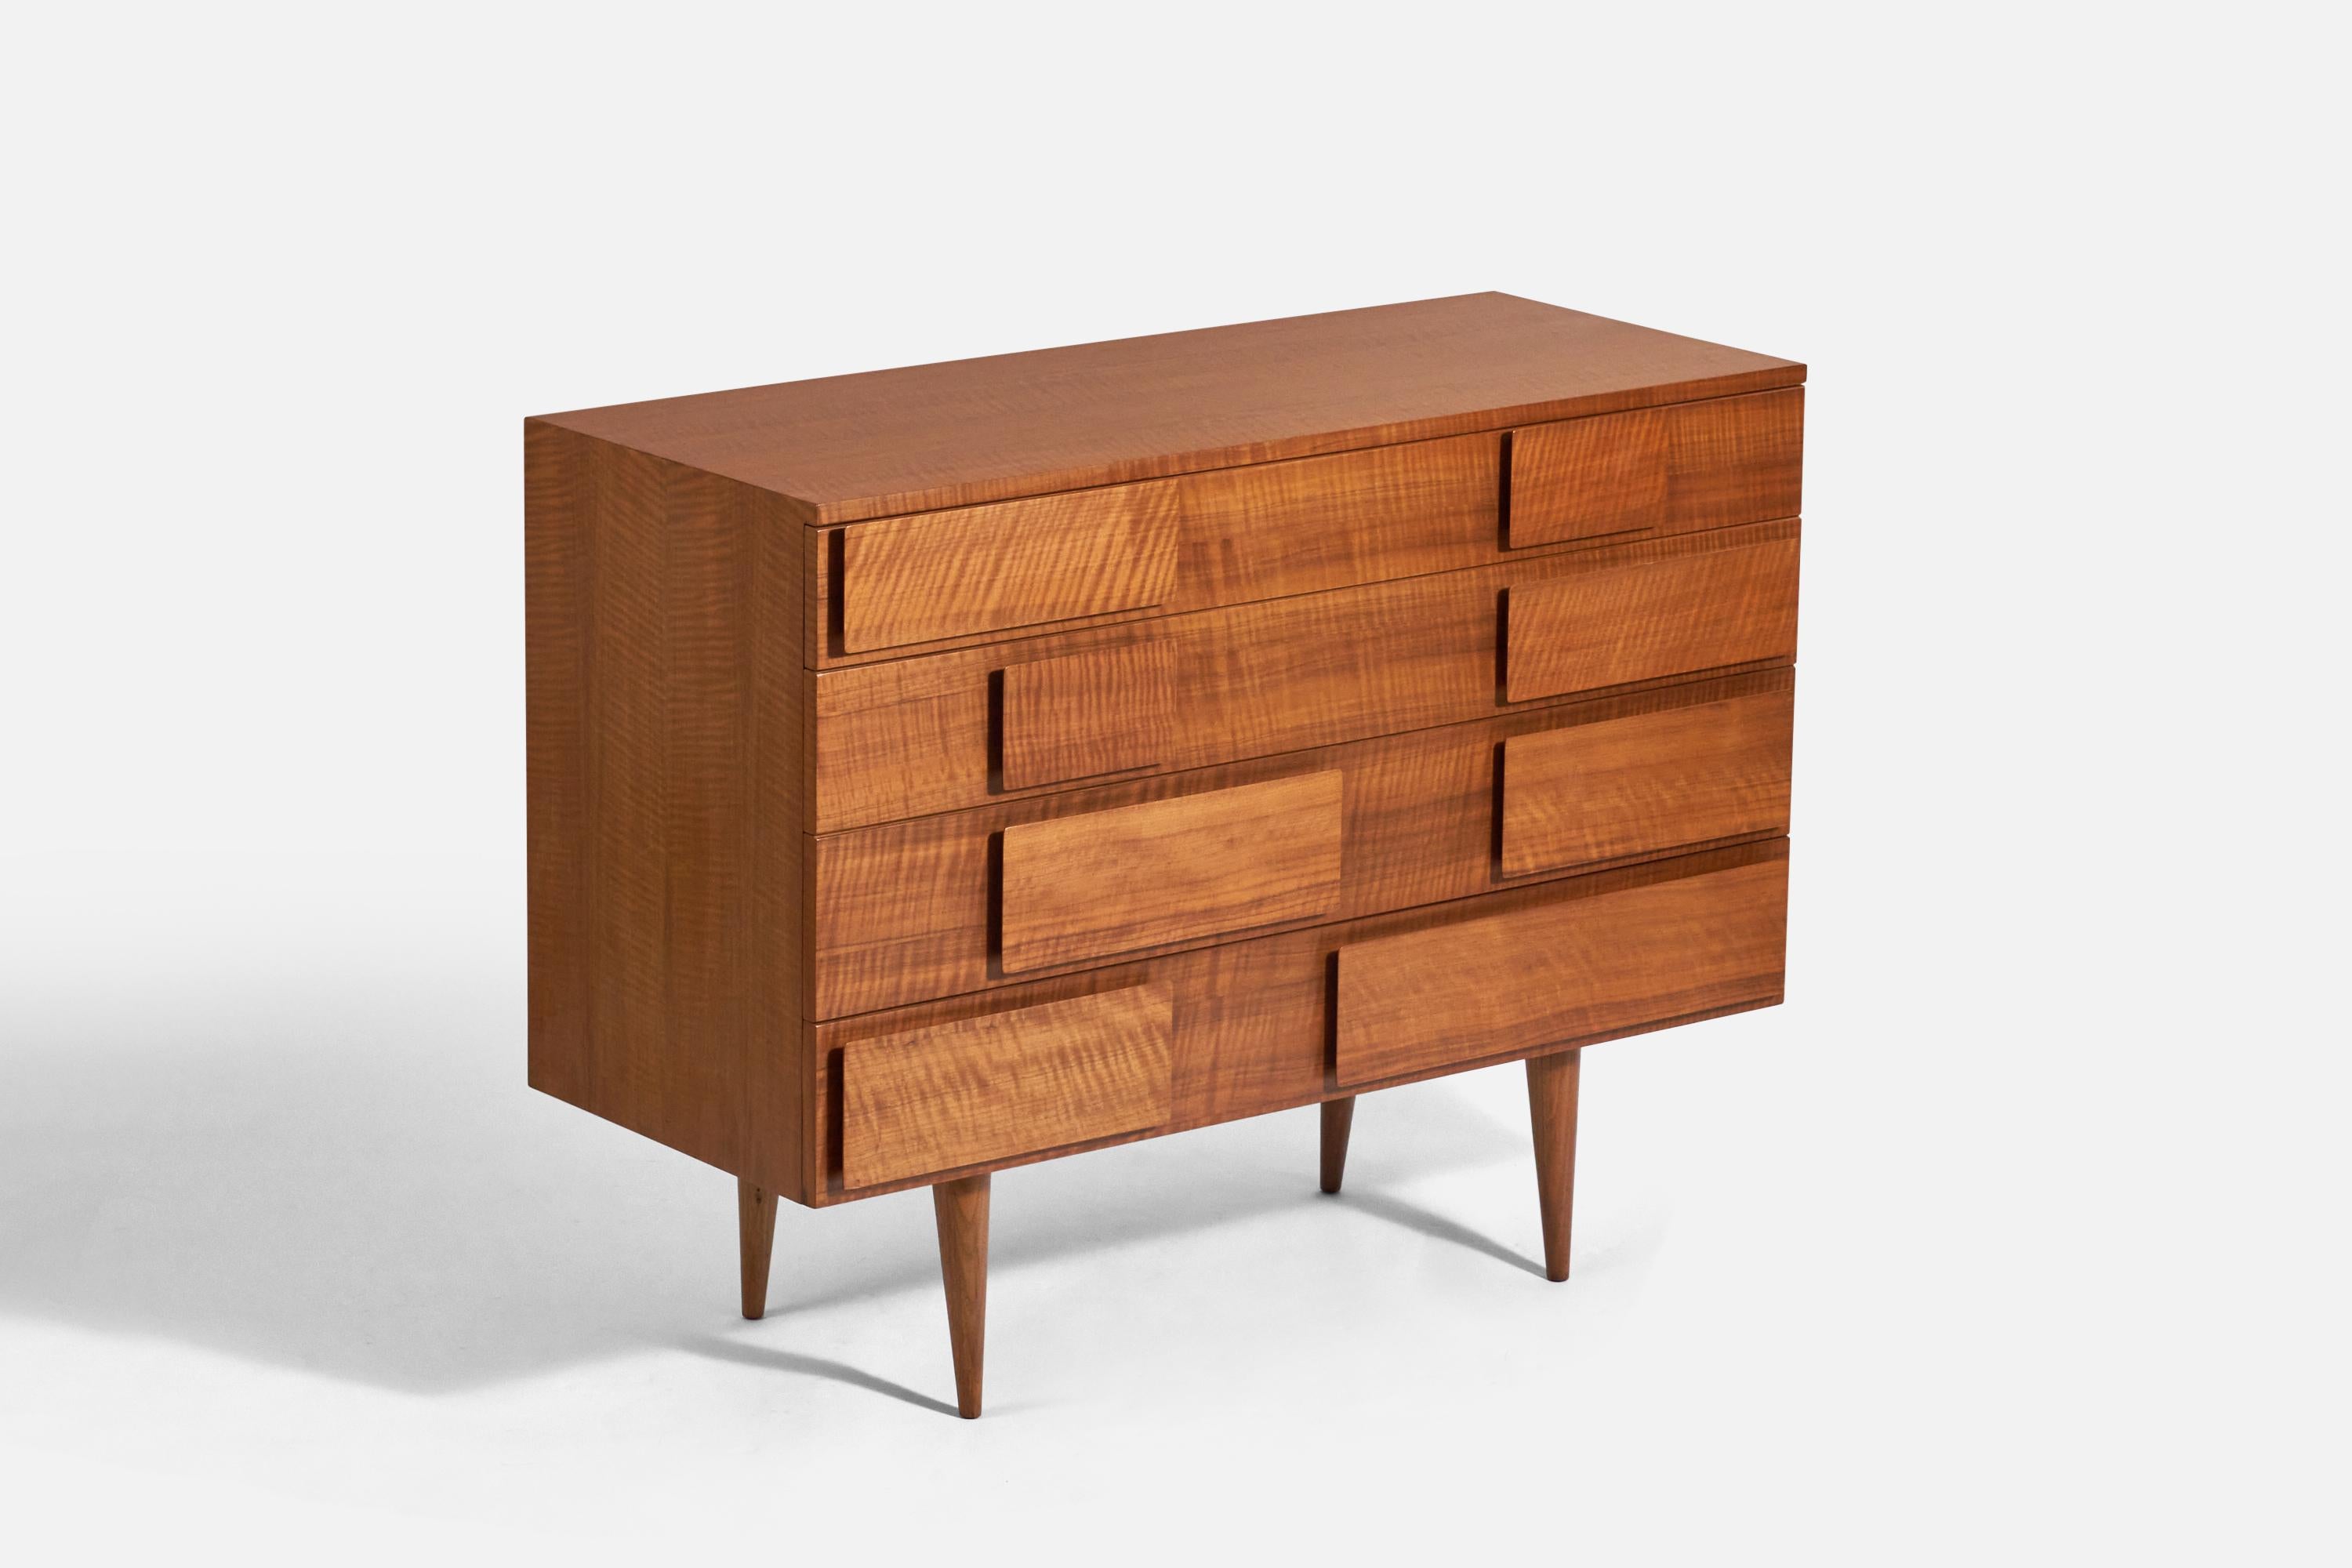 A walnut dresser designed by Gio Ponti and produced by M. Singer & Sons, New York, America, 1950s. Labeled. 

